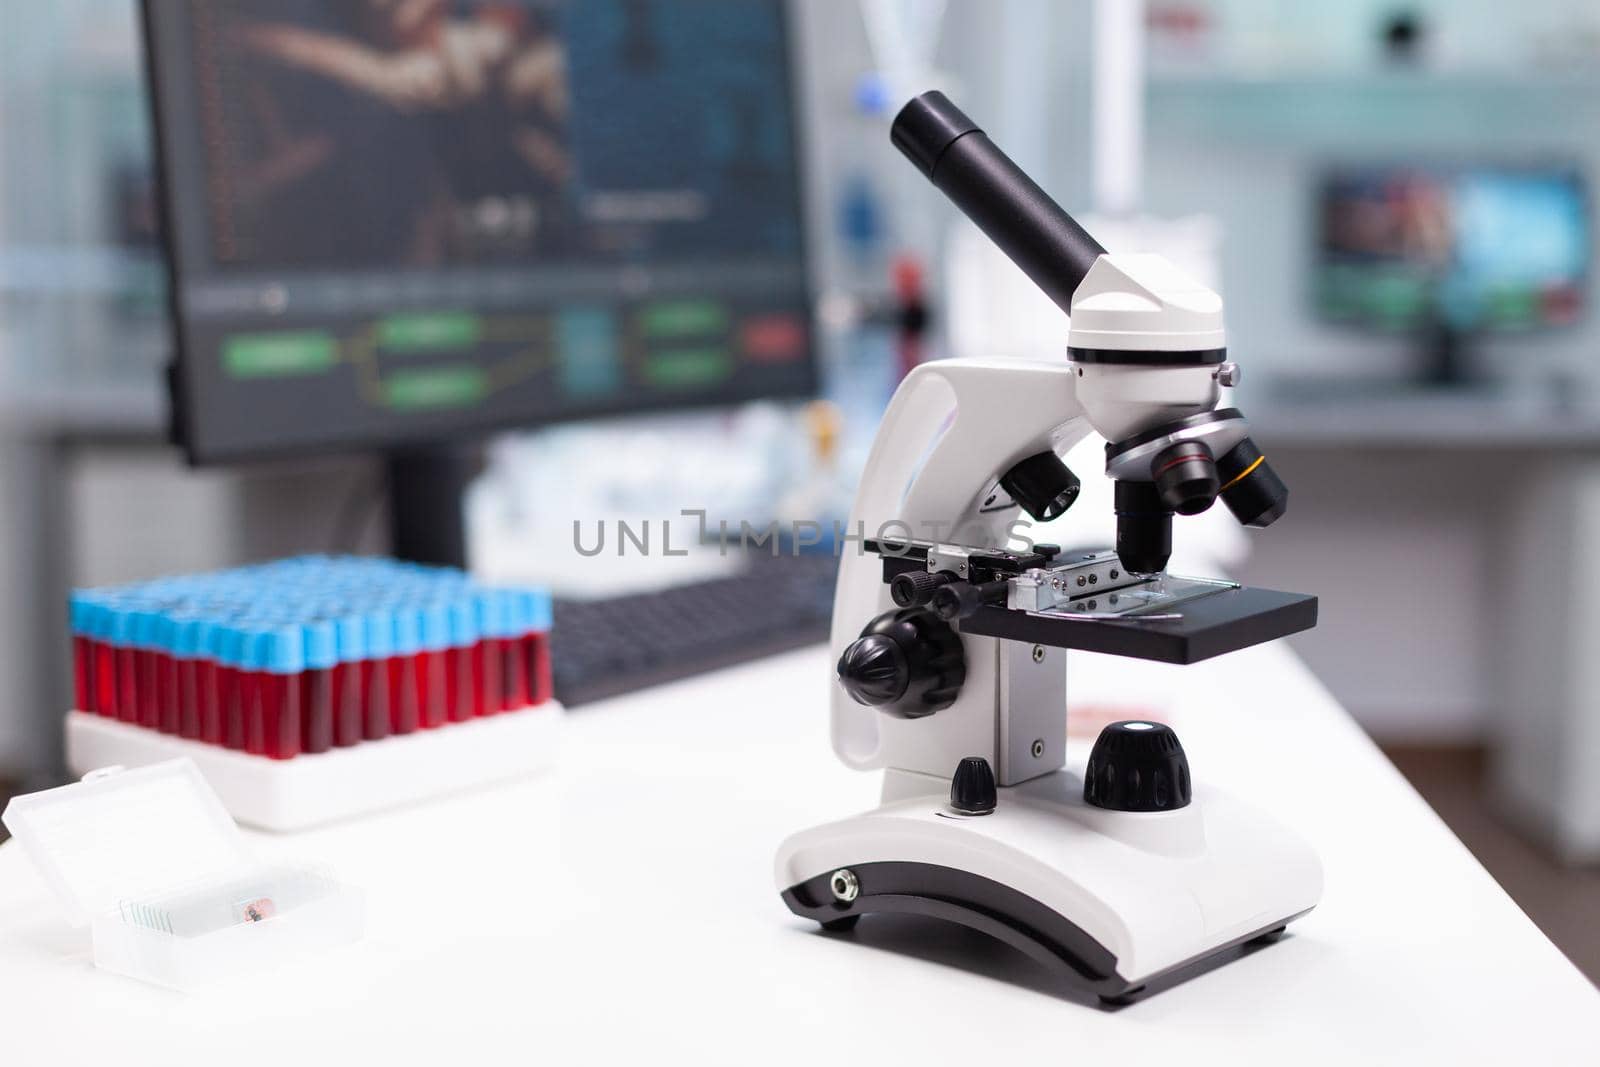 Dna molecular sample under microscope ready for biological virus vaccine investigation in biochemistry pharmaceutical hospital laboratory. Biological expertise research. Healthcare treatment